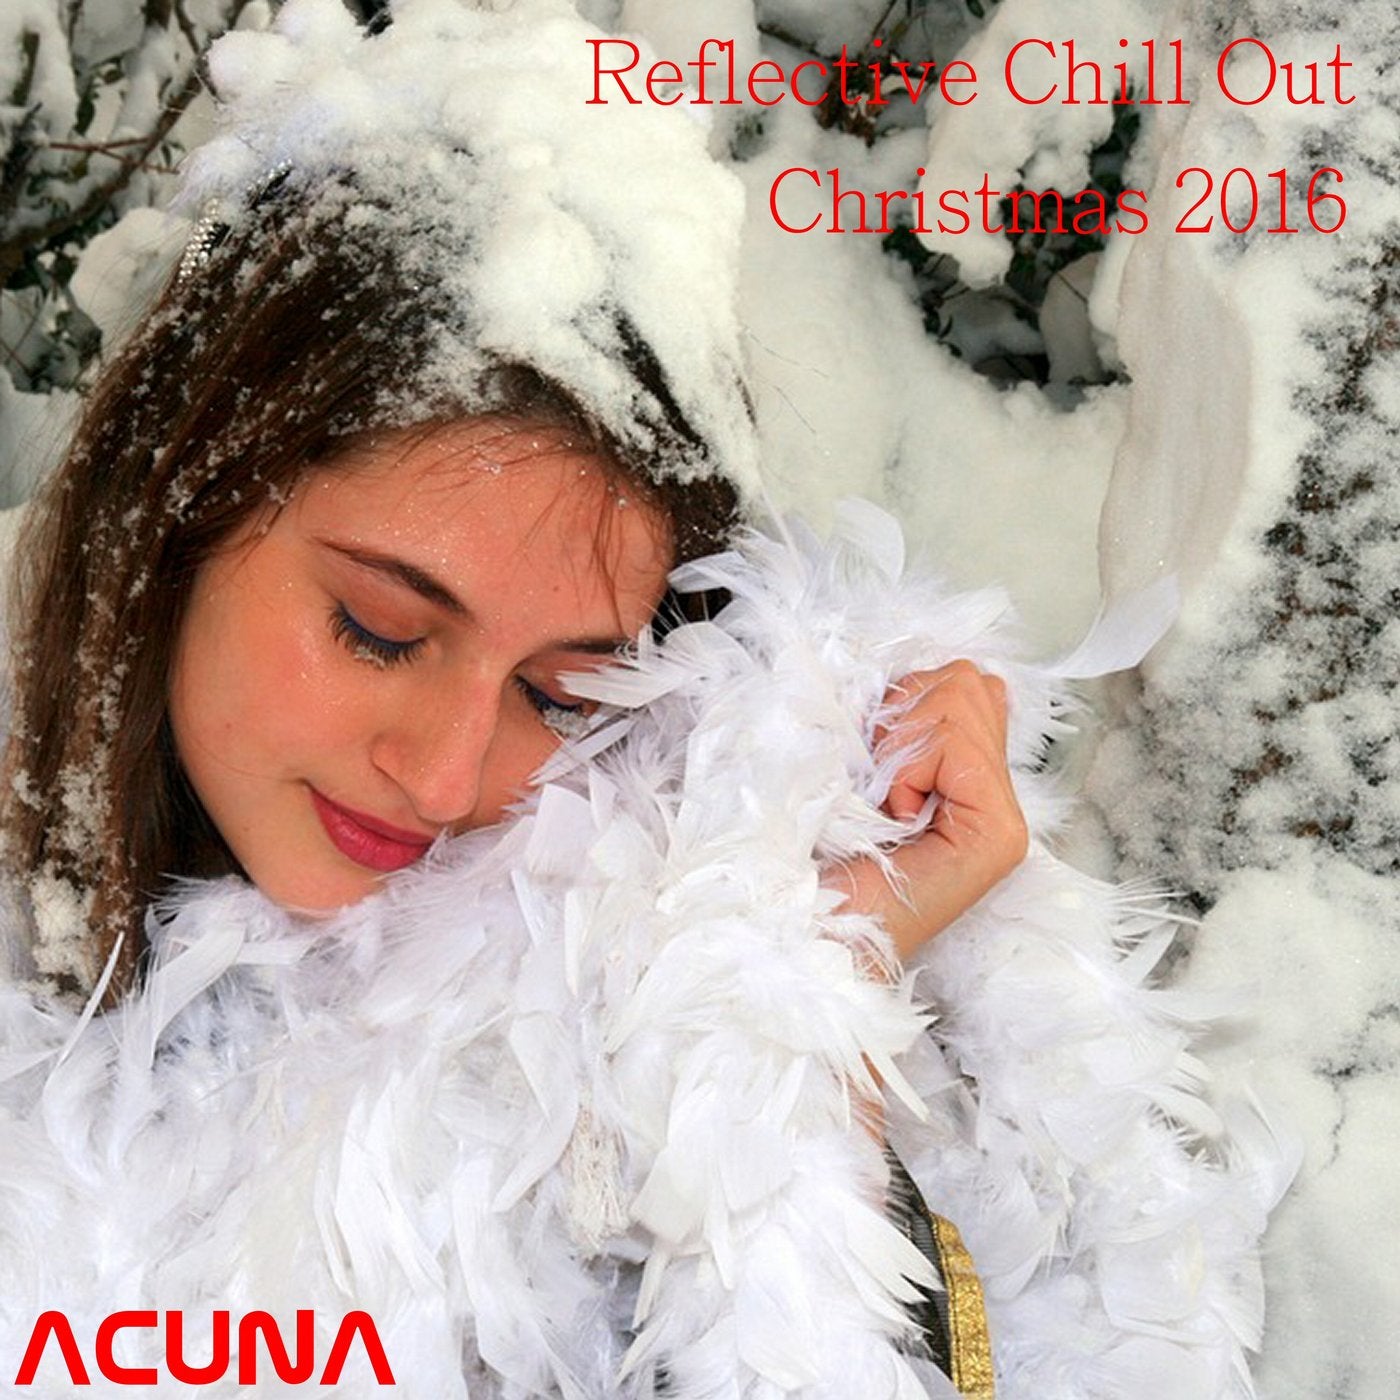 Reflective Chill Out Christmas 2016